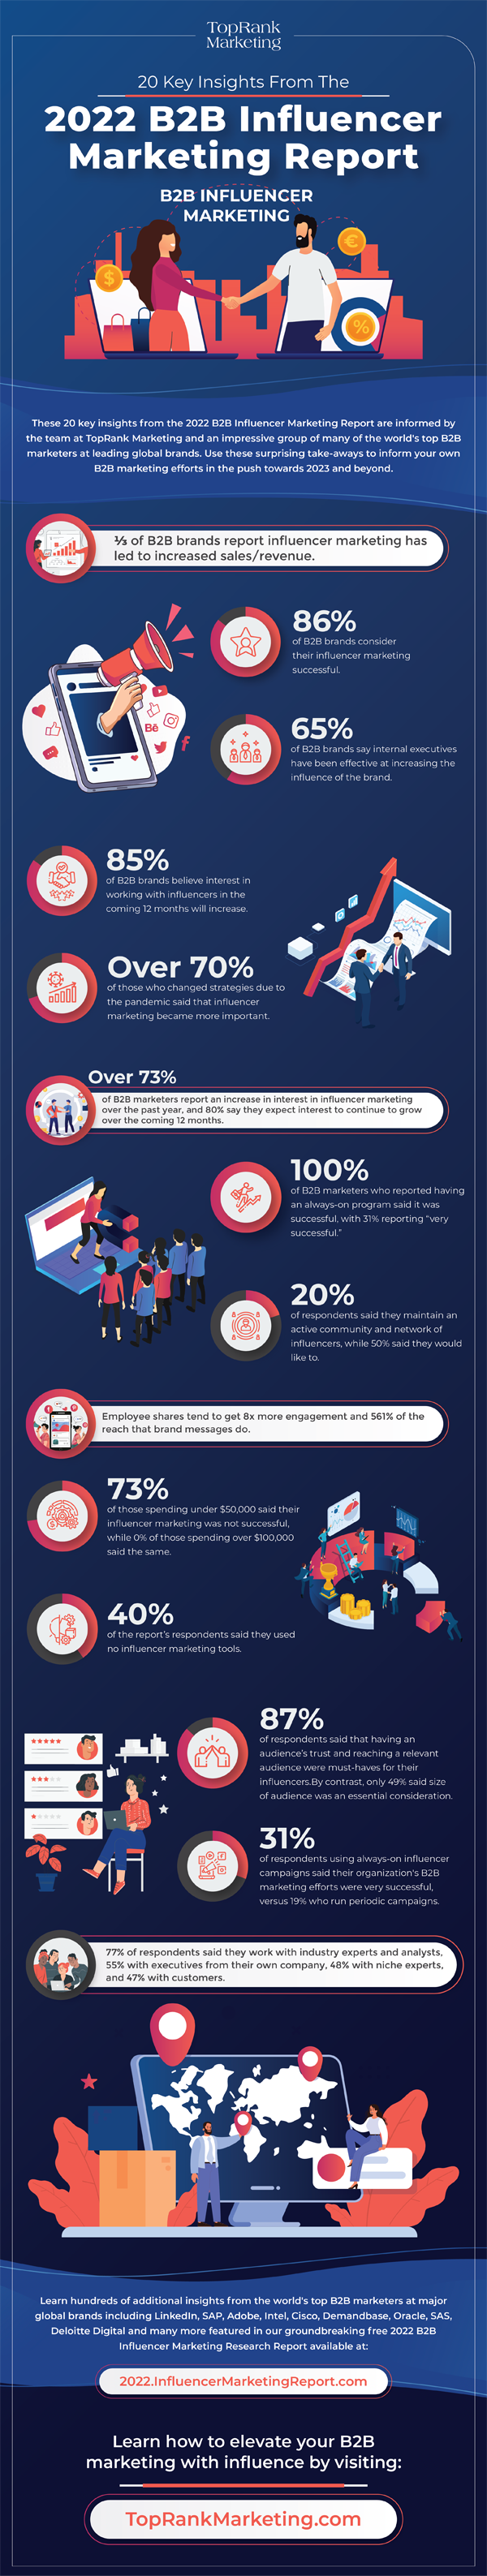 Infographic: 20 Key Insights From The 2022 B2B Influencer Marketing Report